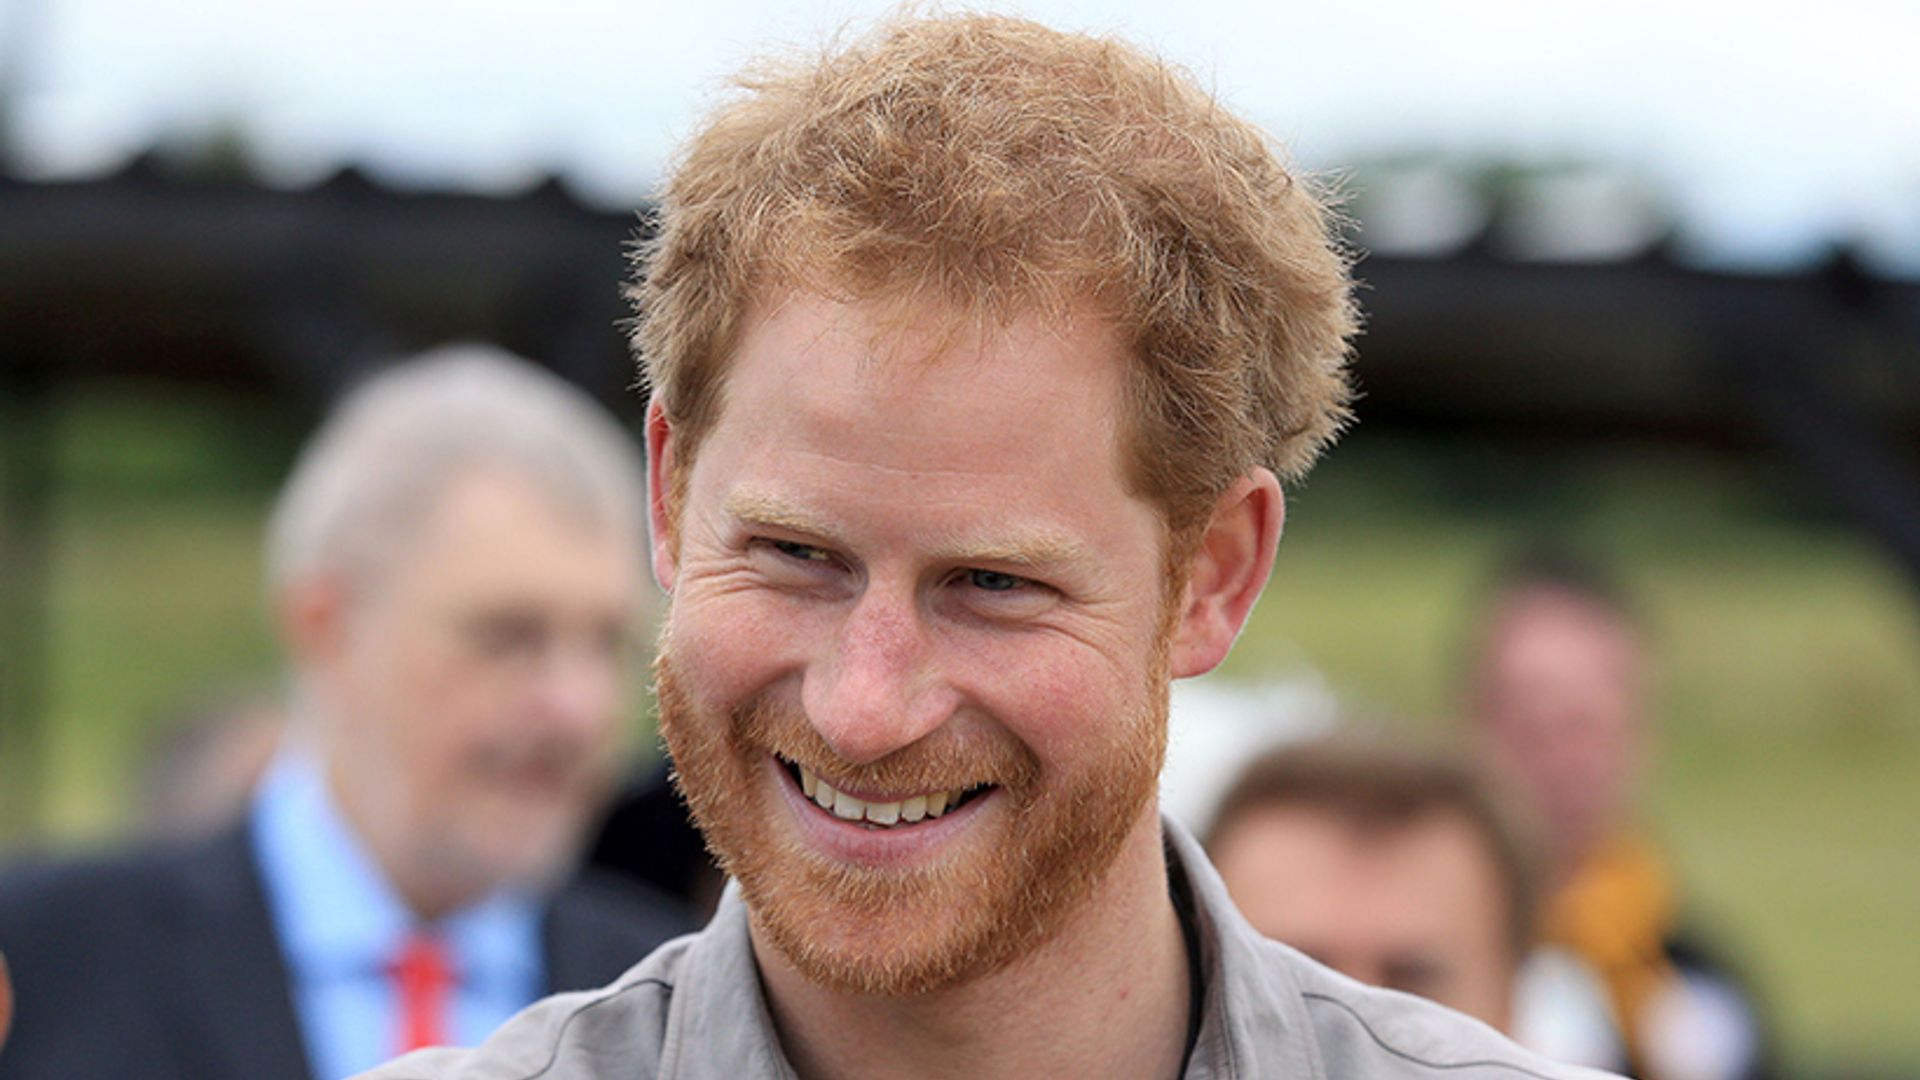 Prince Harry shares personal photos from secret trip to Lesotho